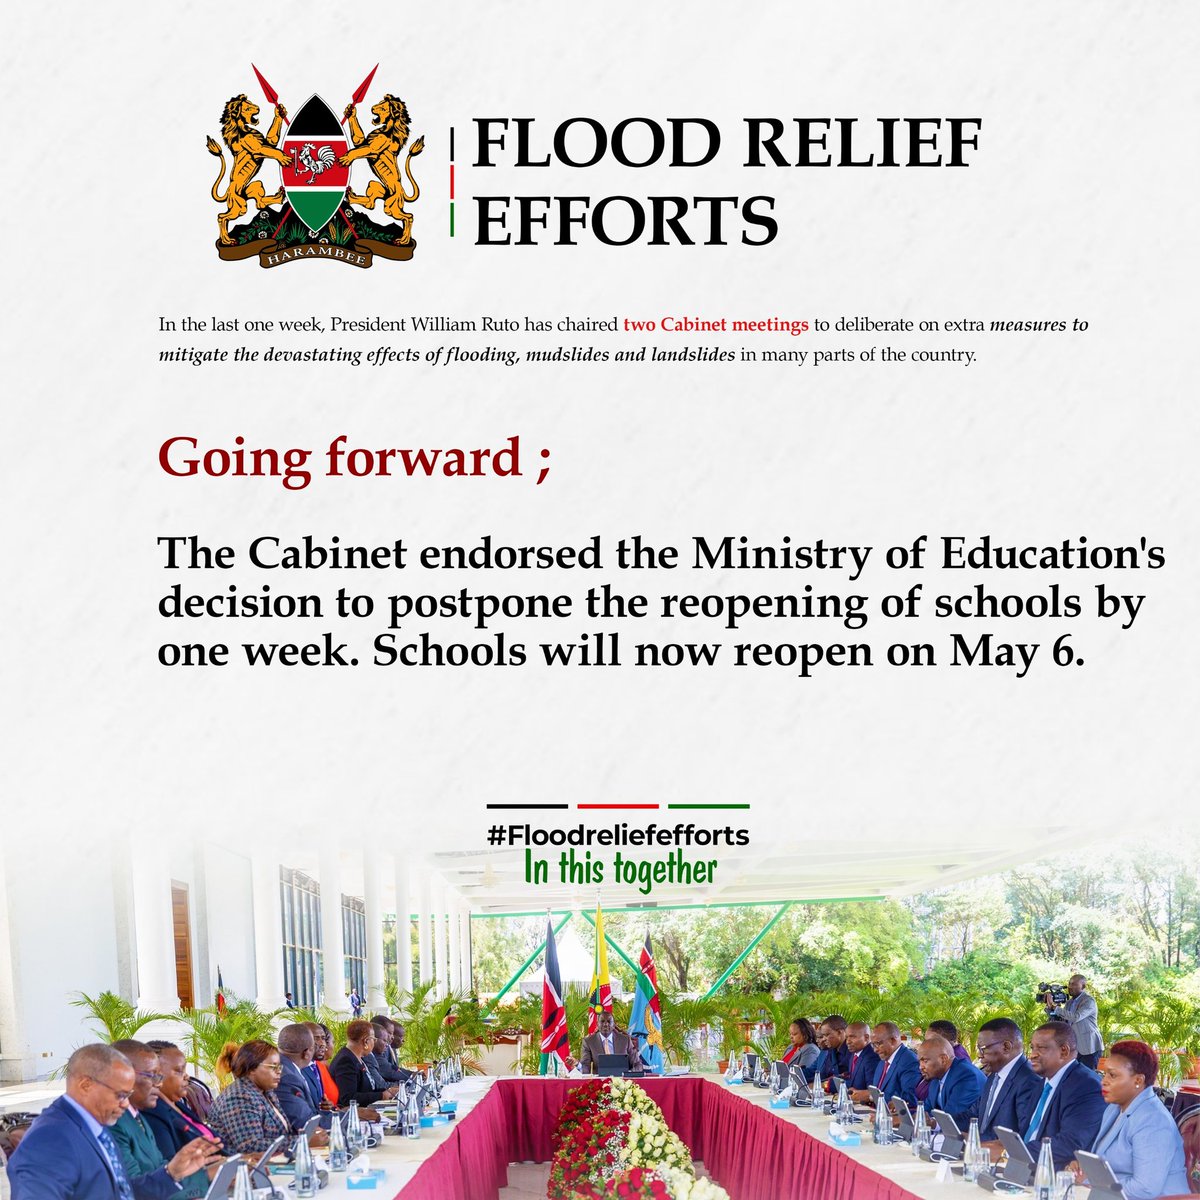 Education and awareness are key pillars of Cabinet's #FloodReliefEfforts strategy, empowering citizens with knowledge to mitigate risks and adapt to changing climate conditions. We're InItTogether.